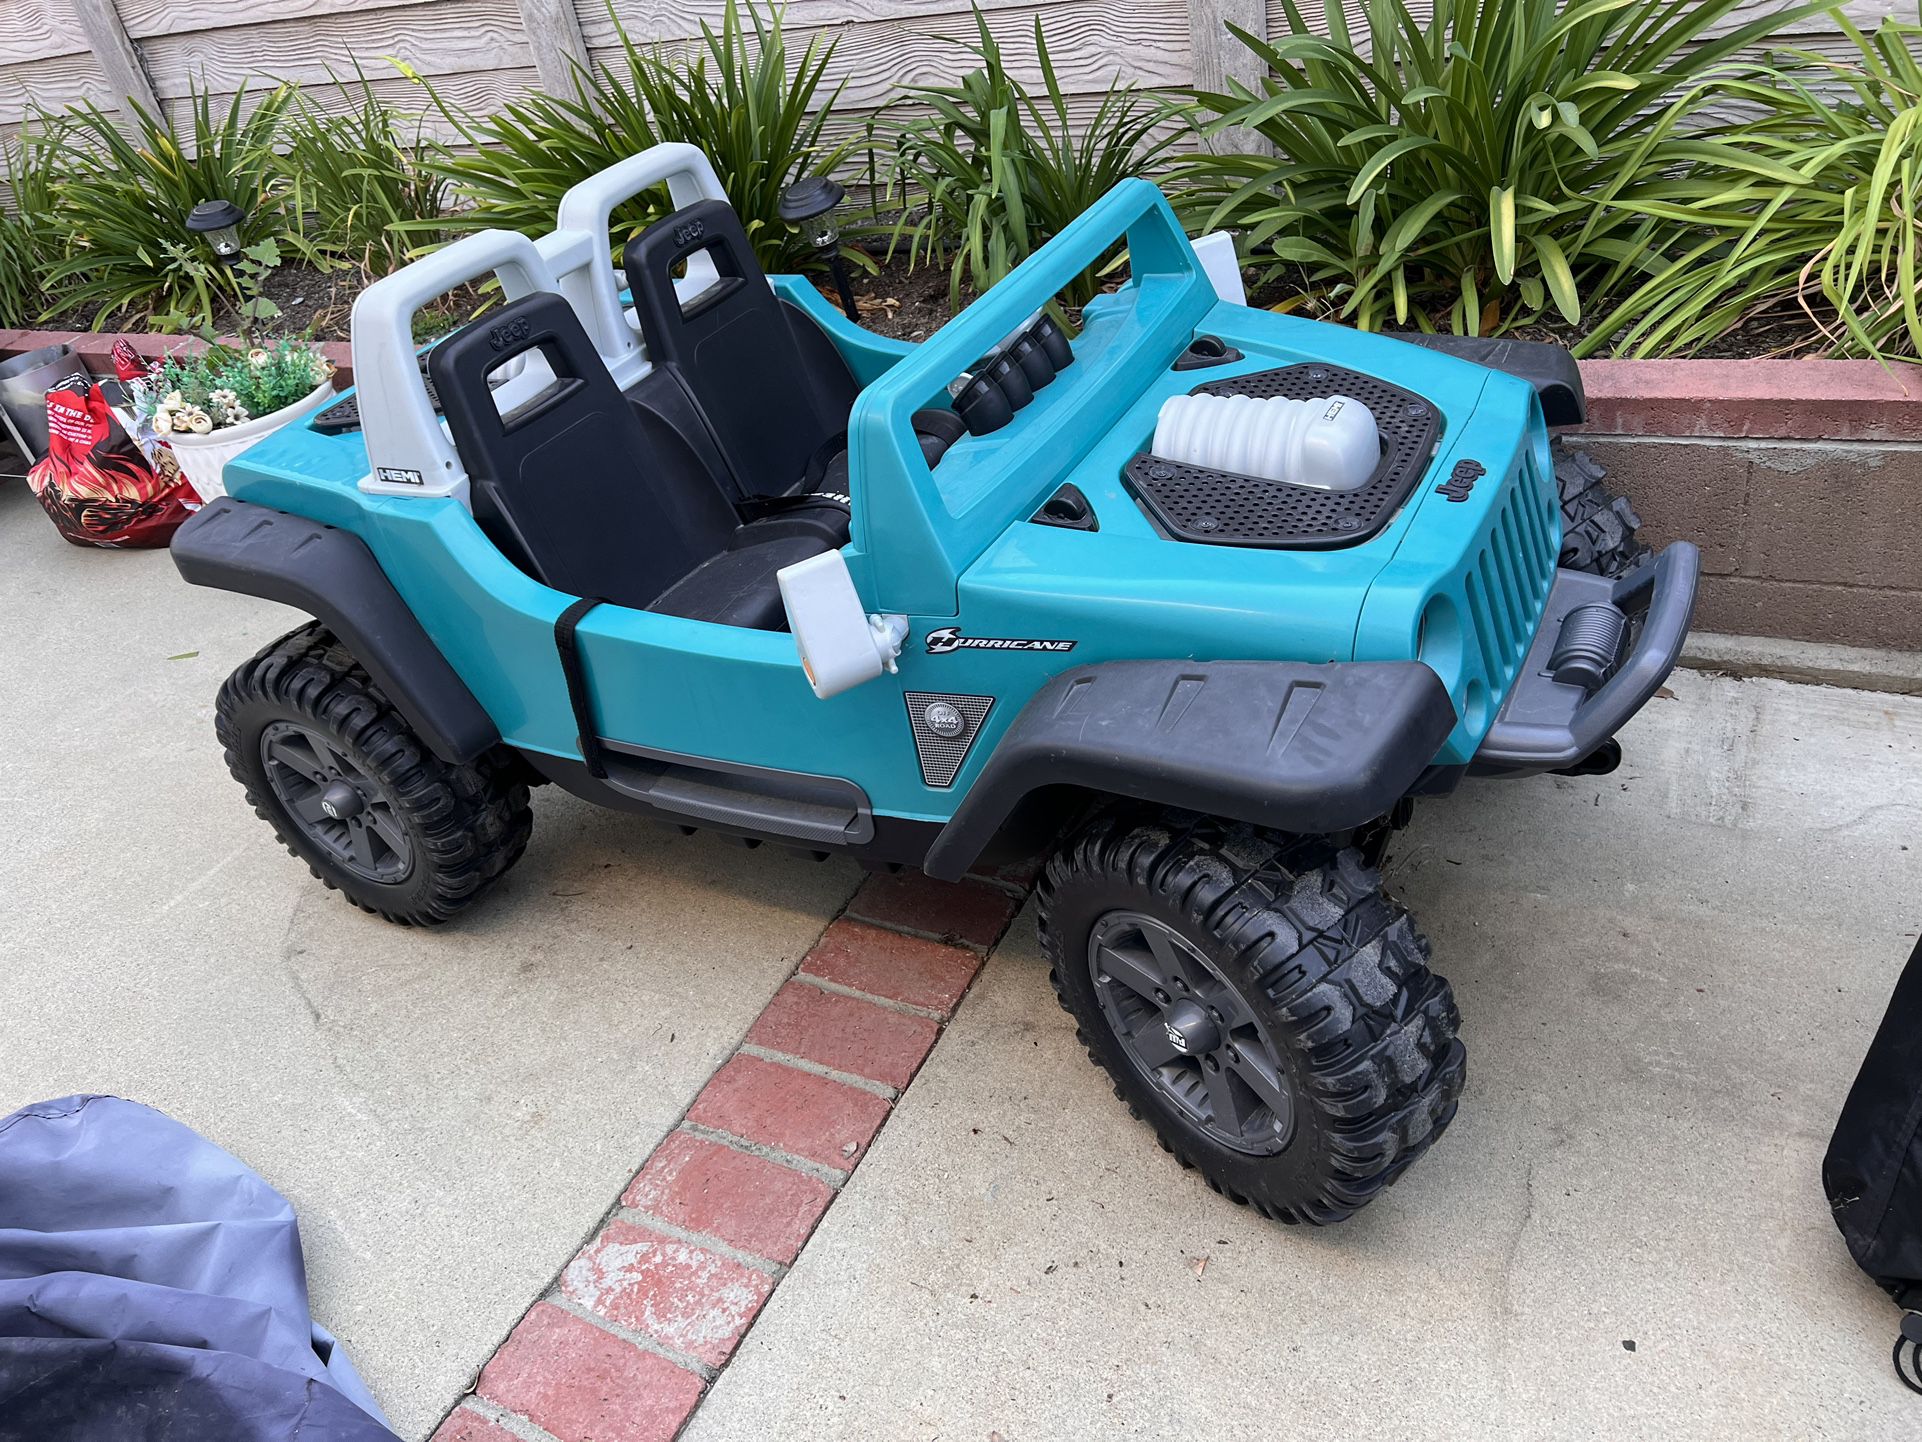 Jeep Electric Car For Kids Power Wheels